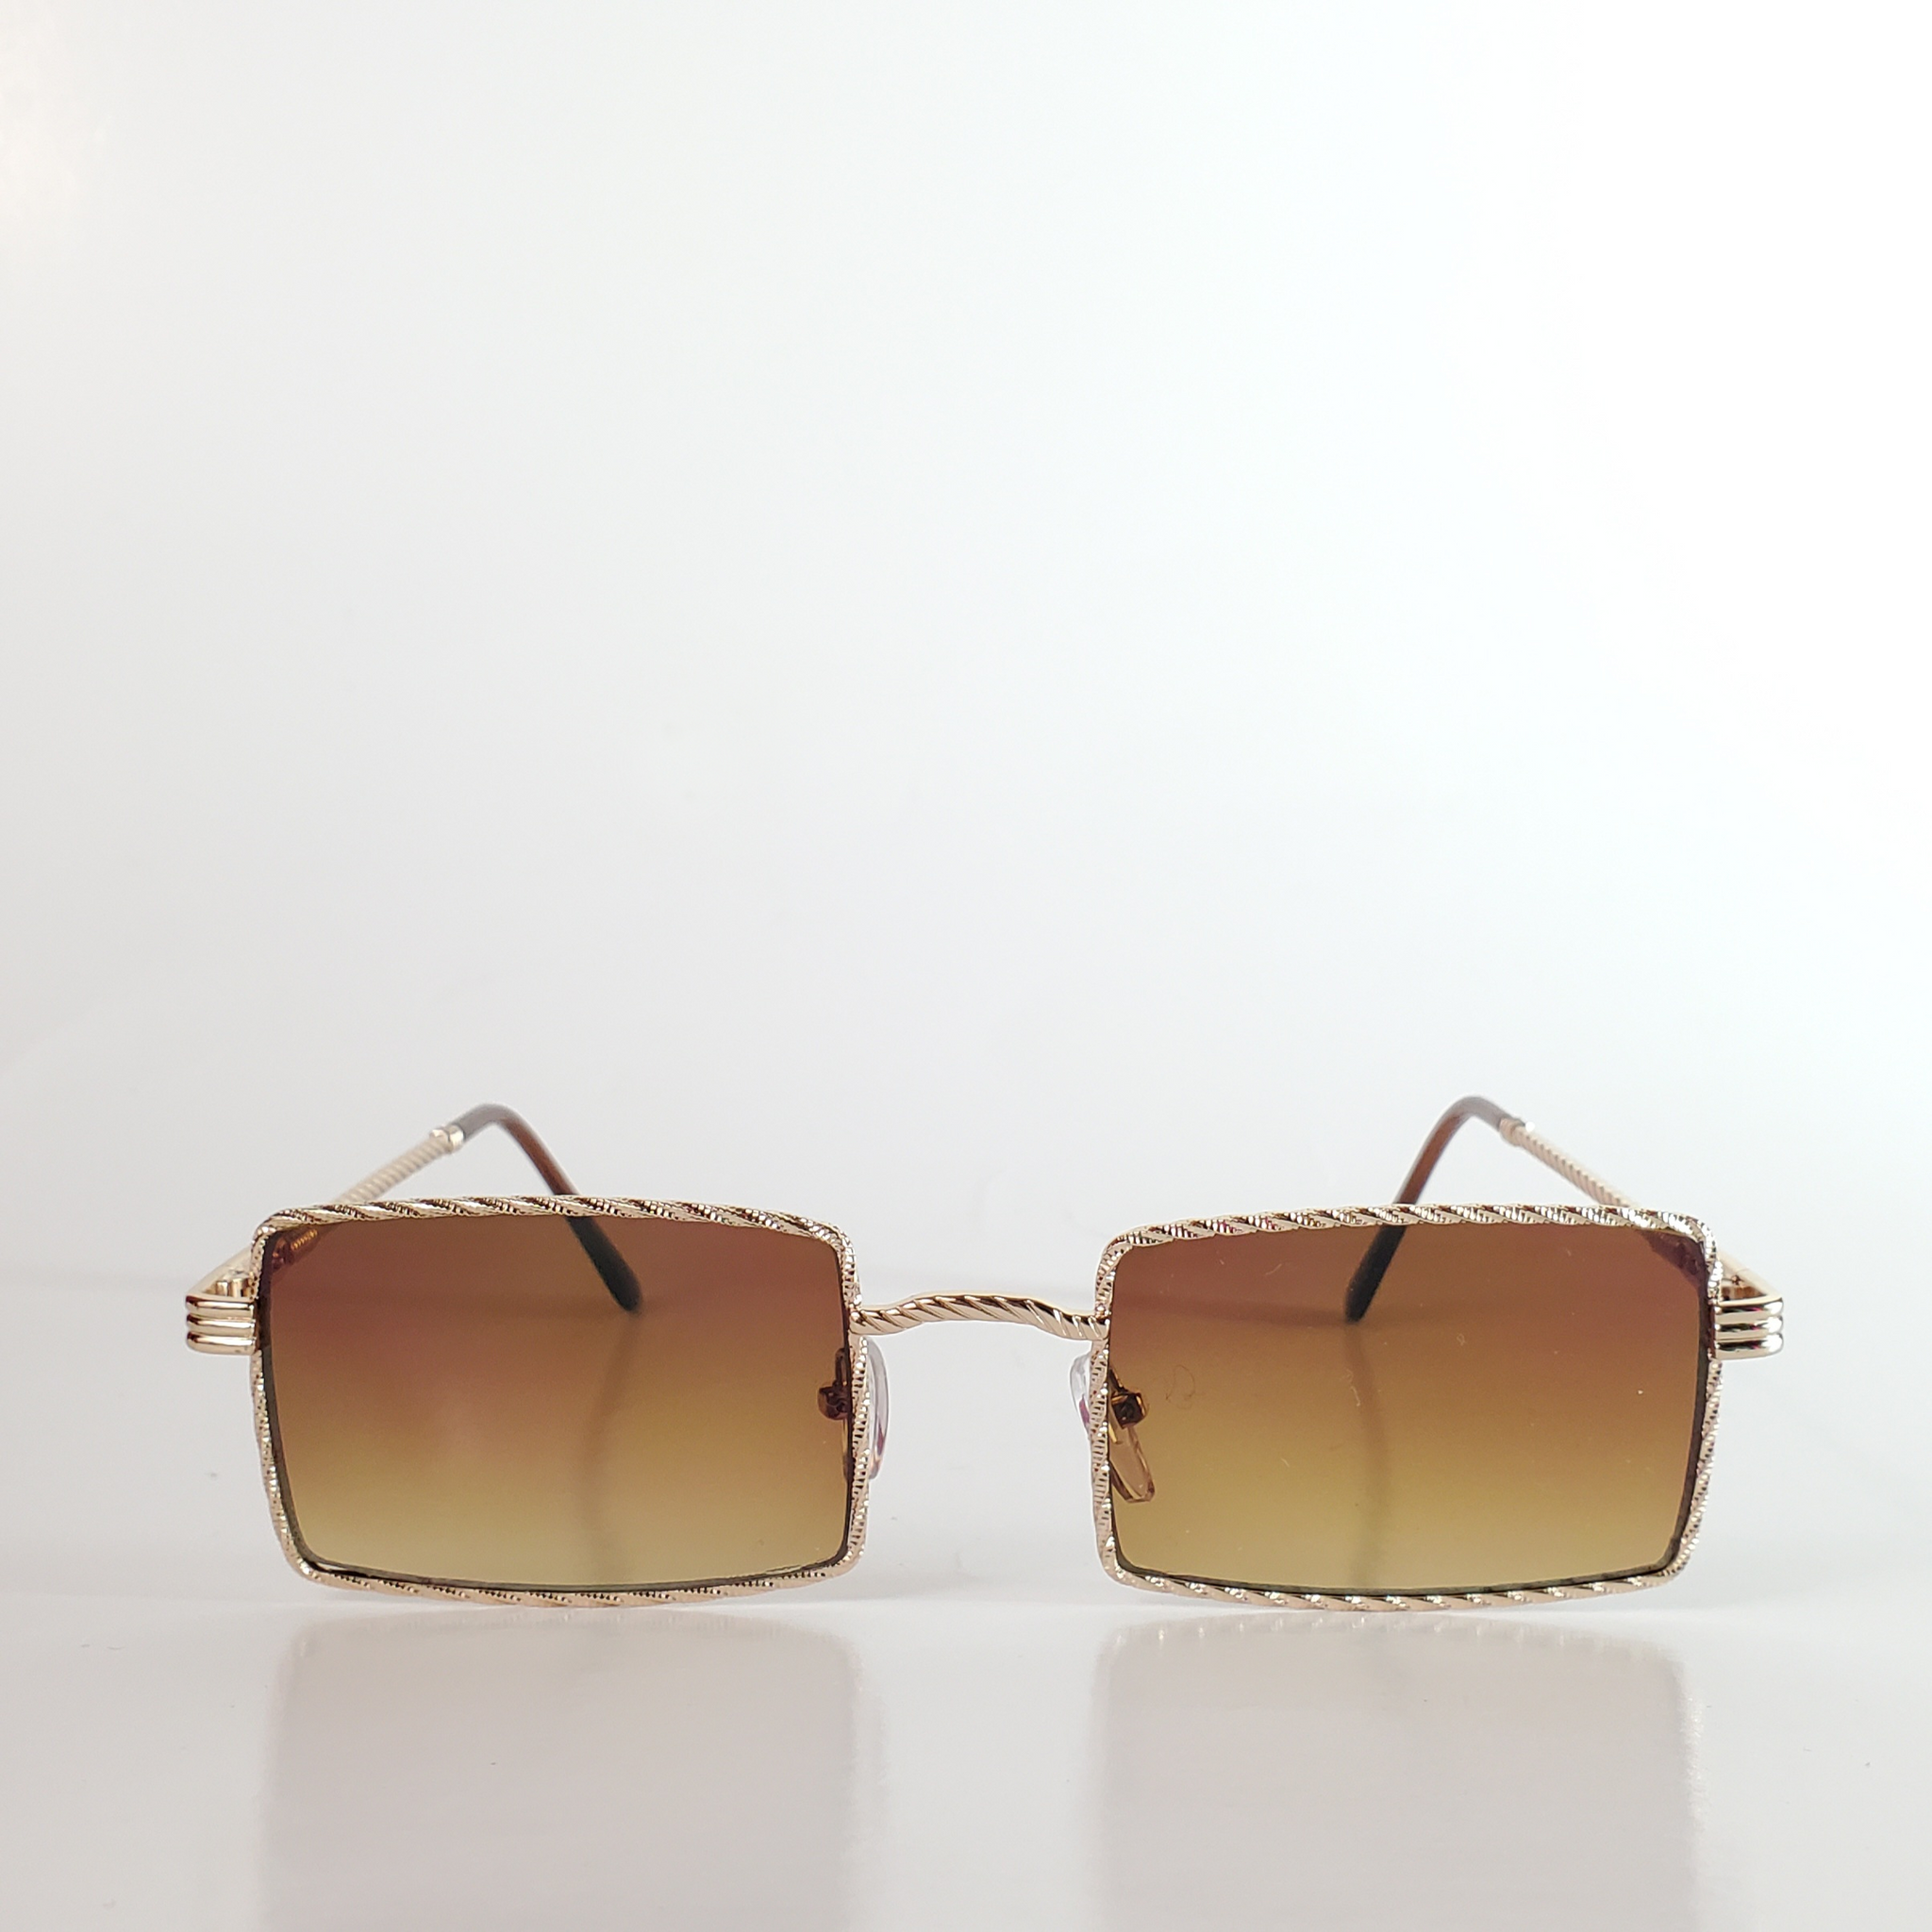 Textured bright gold metal rectangular frame sunglasses with deep brown lenses